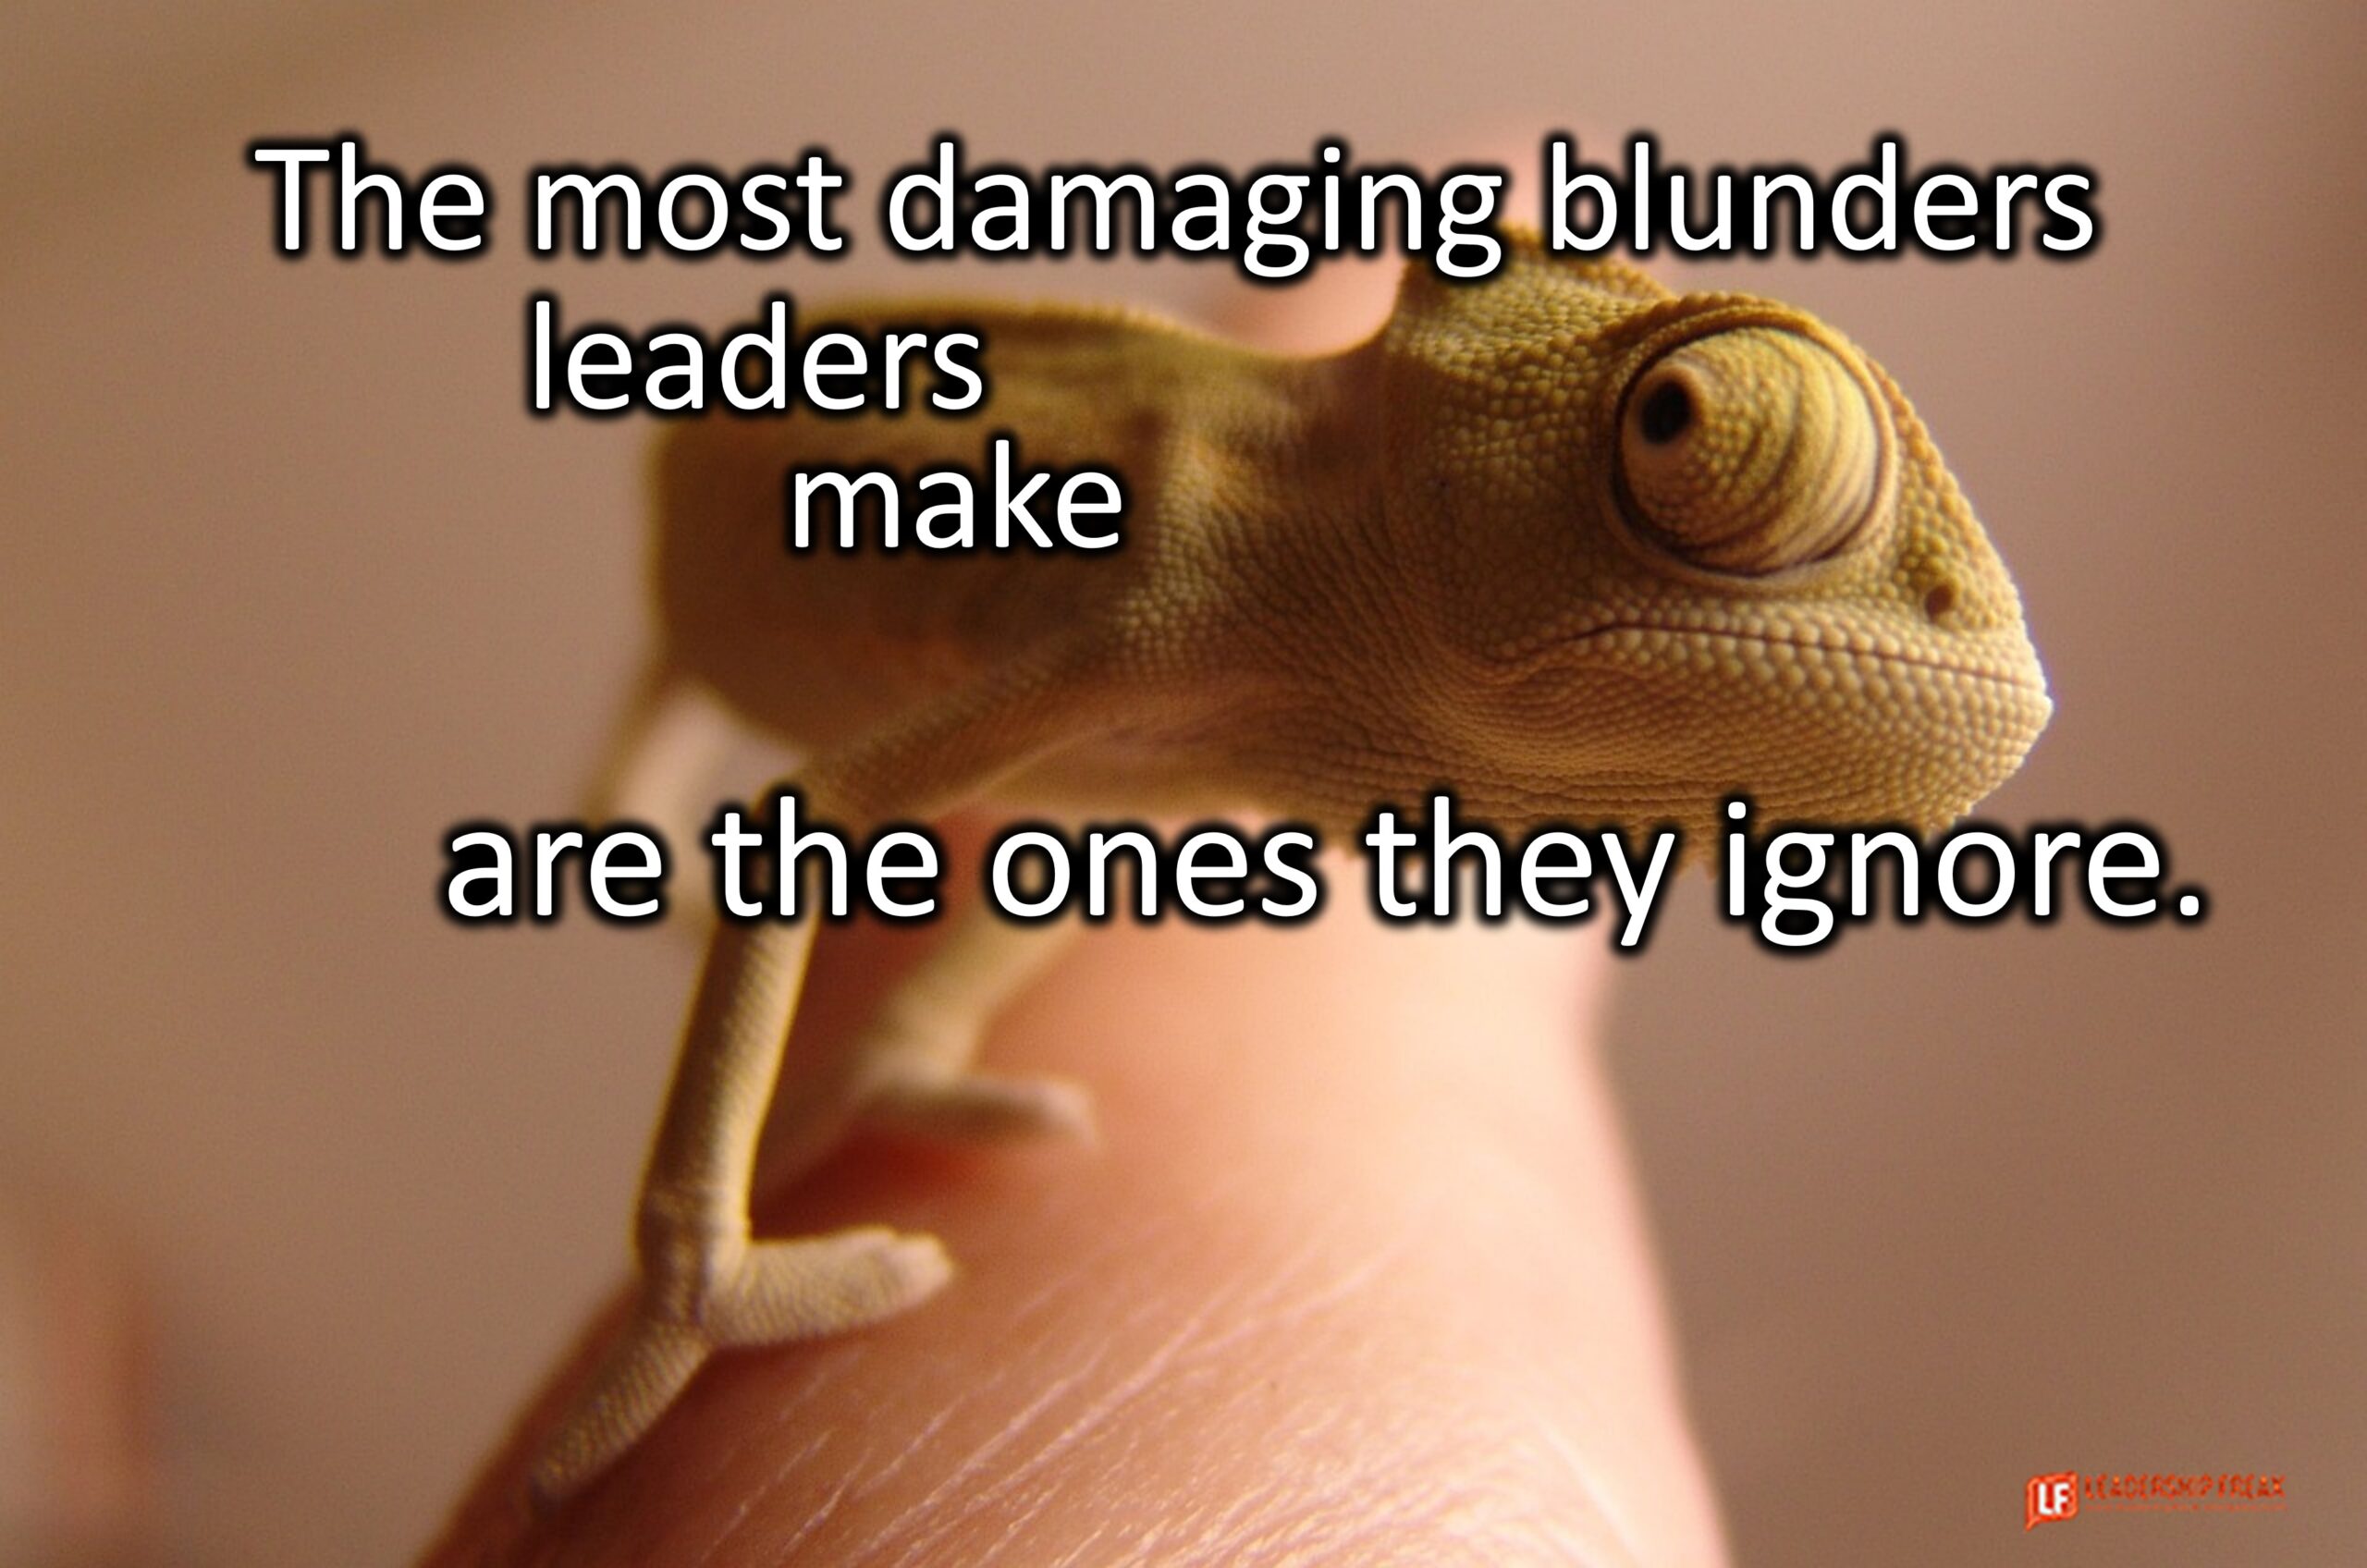 The most damaging blunders leaders make are the ones they ignore.